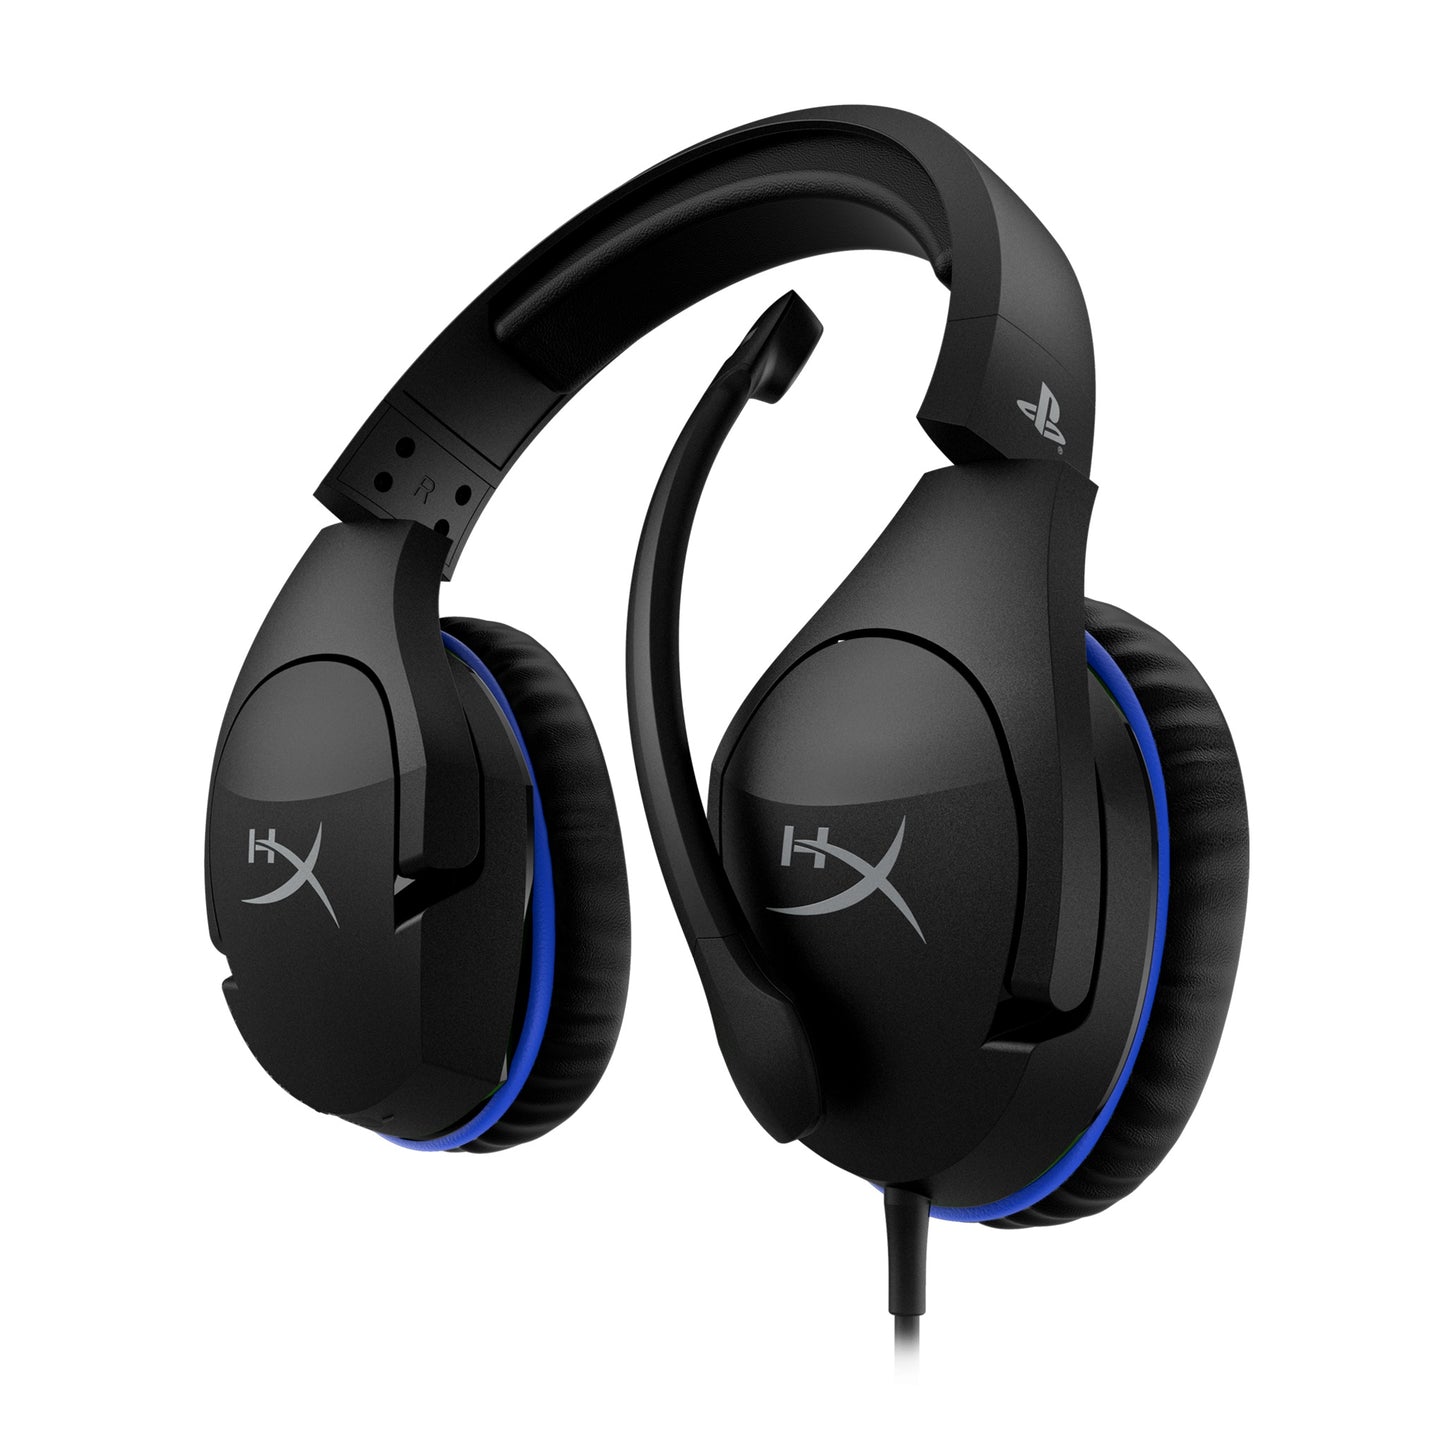 HyperX Cloud Stinger Gaming Headset with Microphone for Playstation for Gaming, Streaming | Model - HX-HSCSS-BK/AS